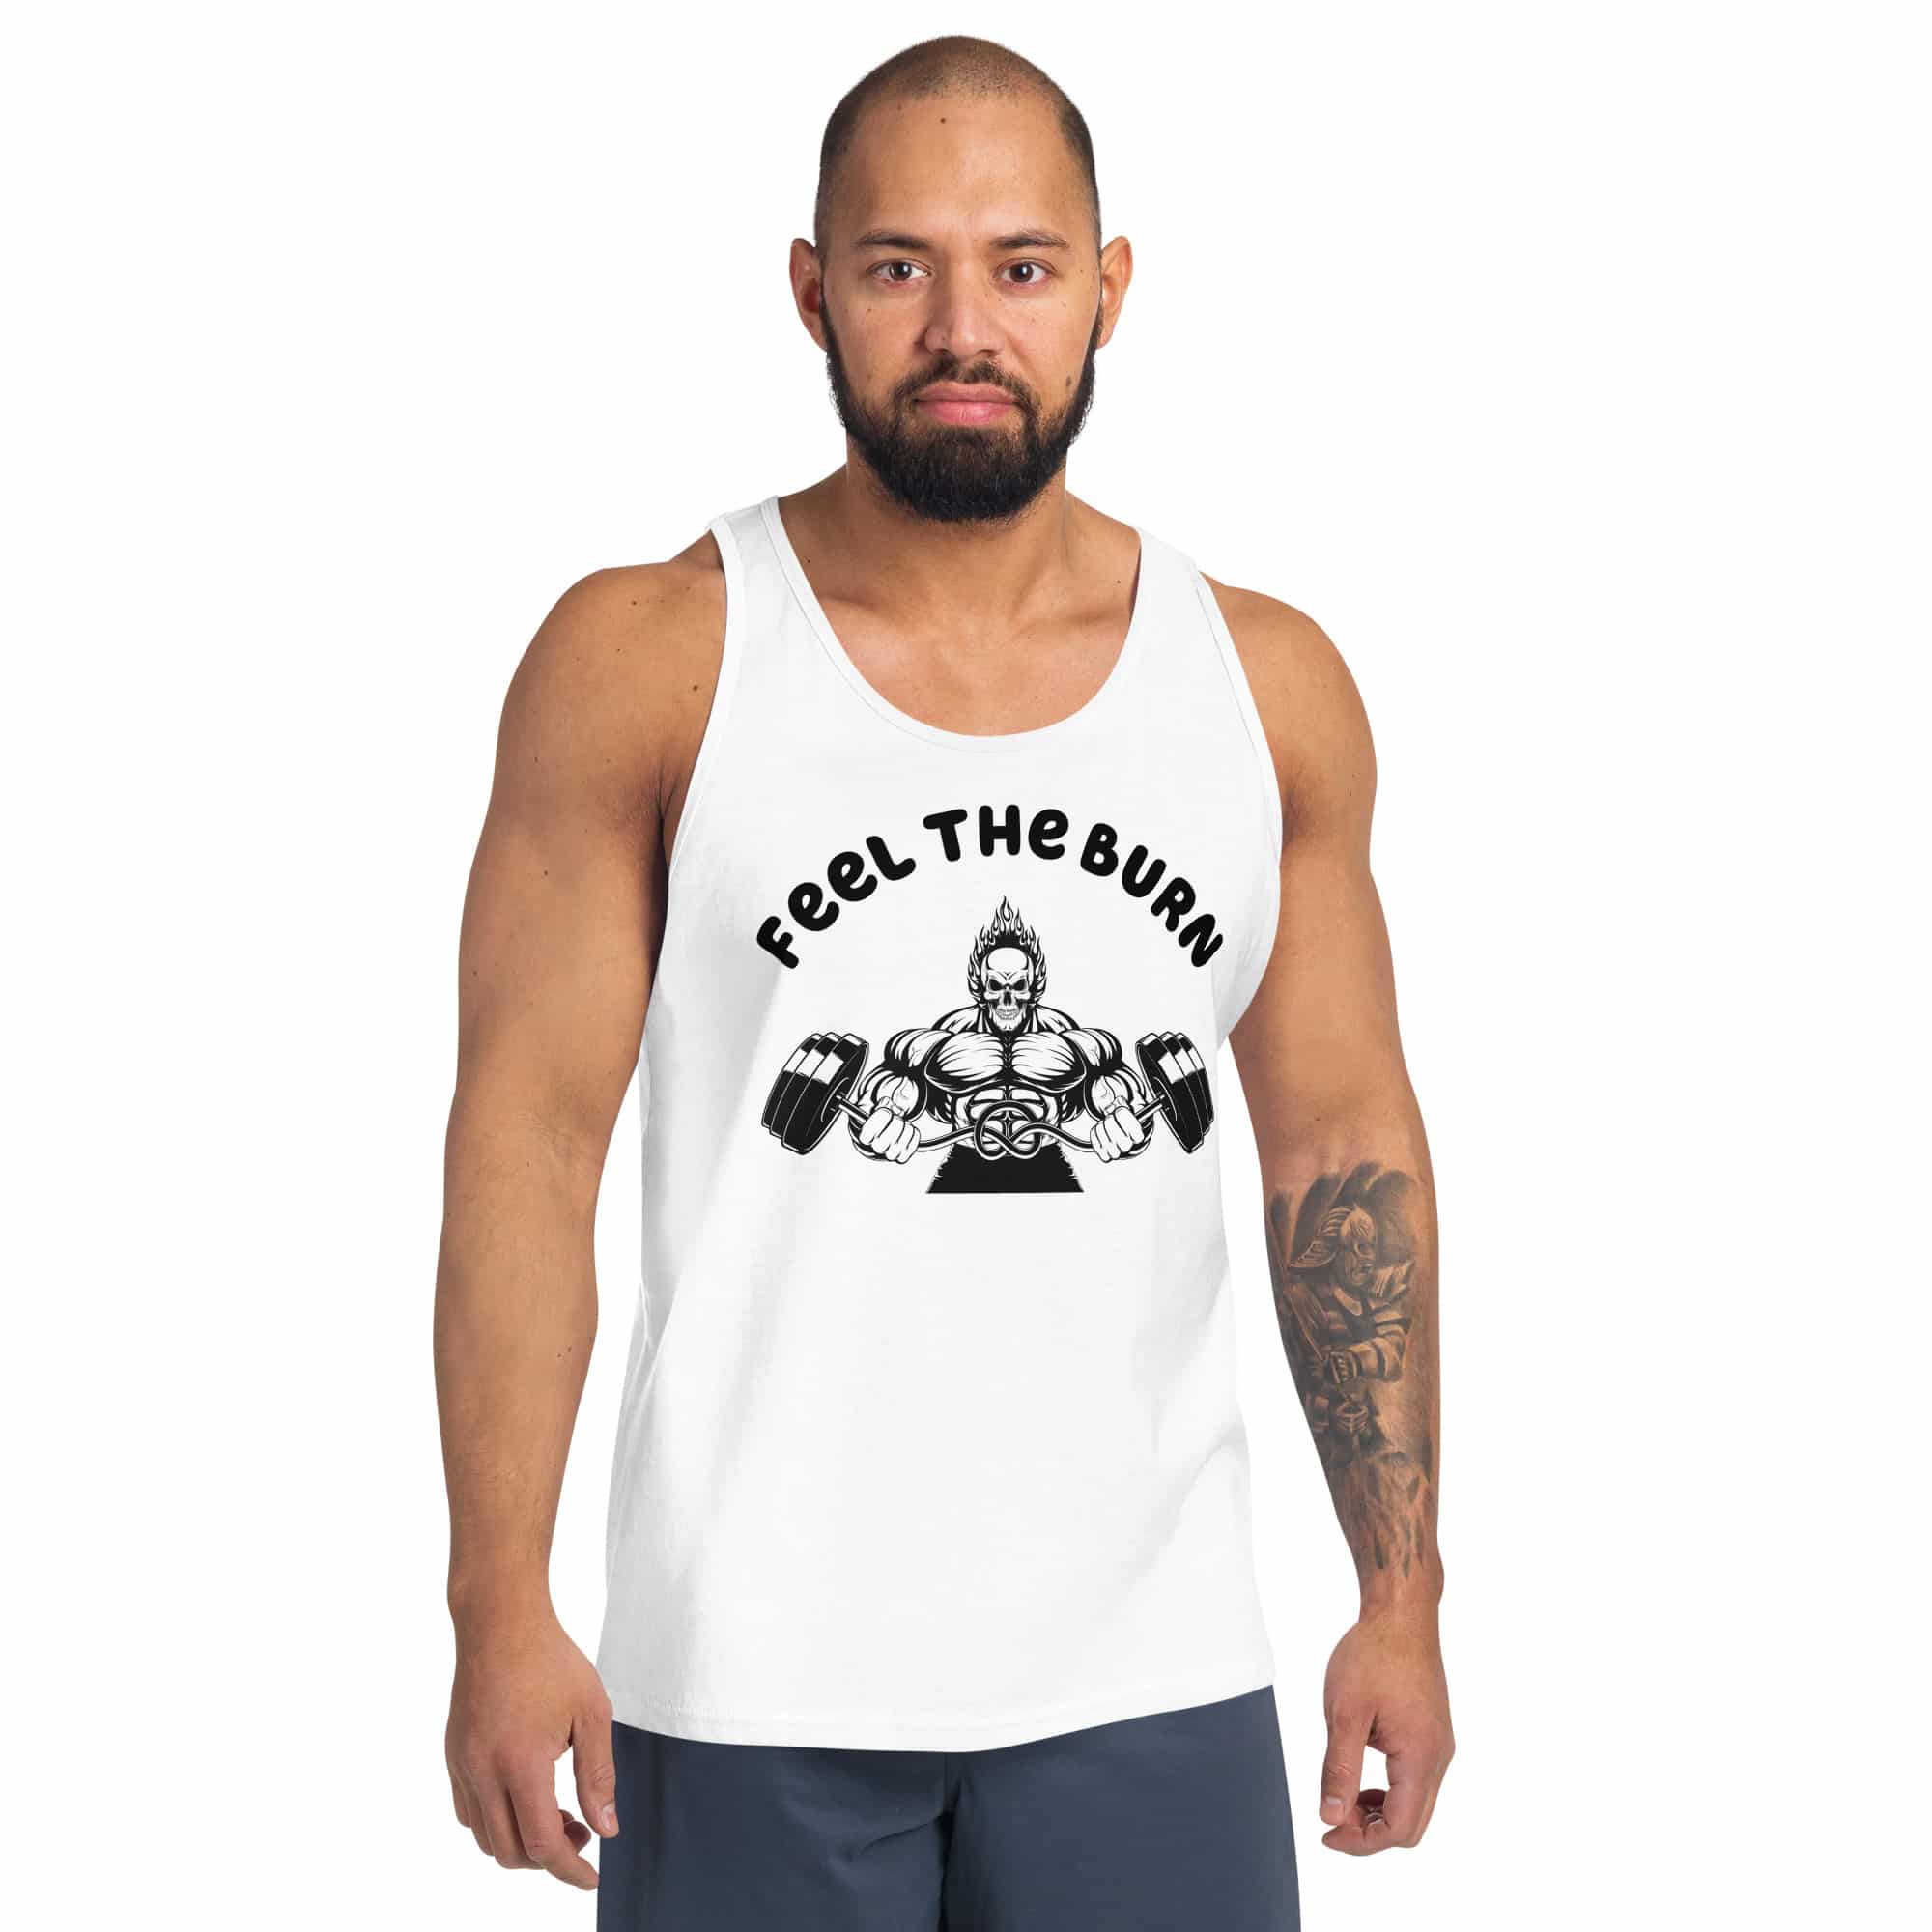 mens staple tank top white front 641b5625caf57